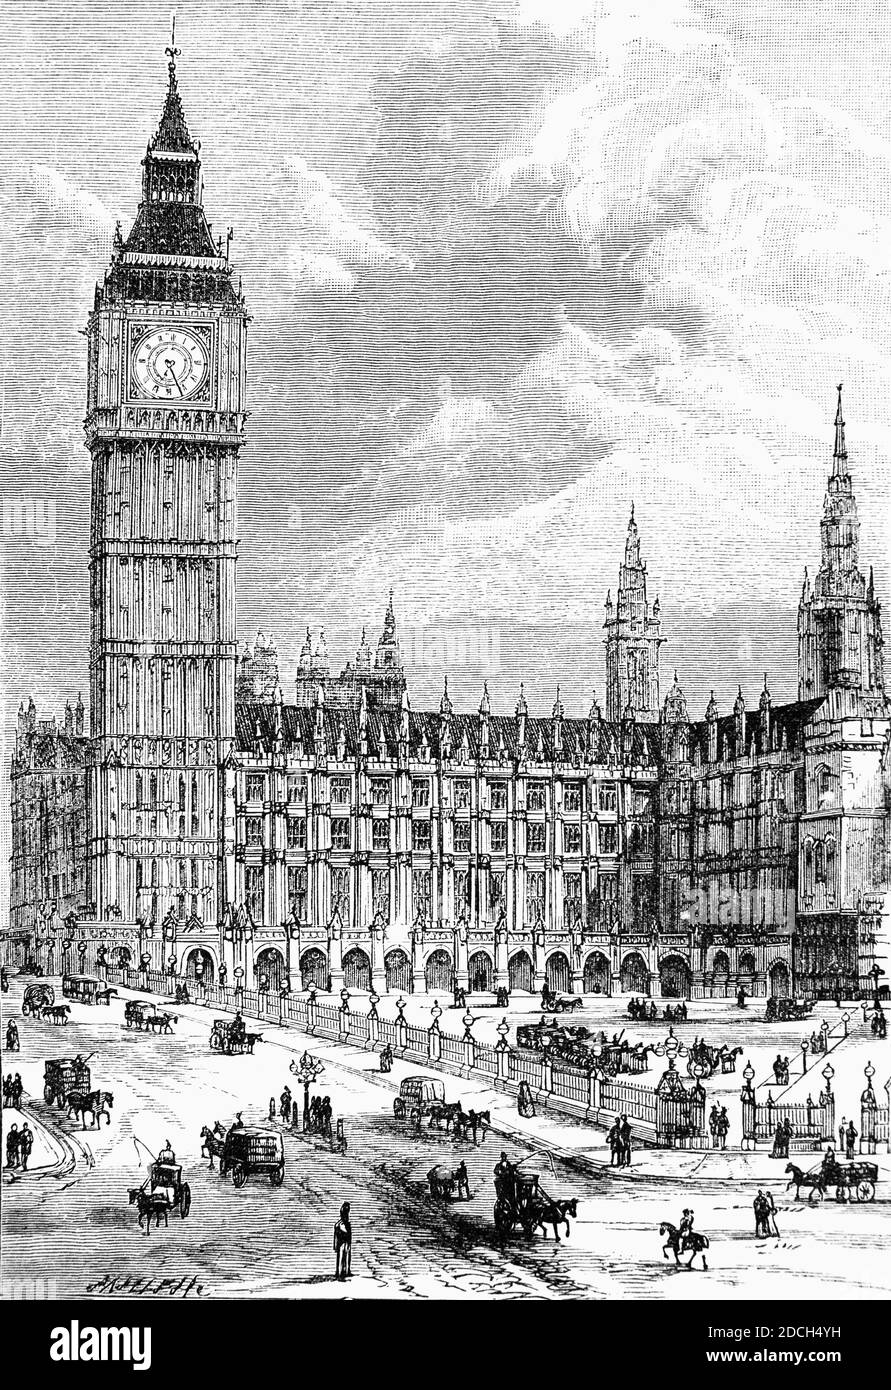 A 19th Century view of Big Ben, a nickname frequently extended to refer to both the clock and the clock tower, and the Palace of Westminster, meeting place for both the House of Commons and the House of Lords, the two houses of the Parliament of the United Kingdom. The complex lies on the north bank of the River Thames in the City of Westminster, in central London, England was designed by Augustus Pugin in a neo-Gothic style and completed in 1859. Stock Photo